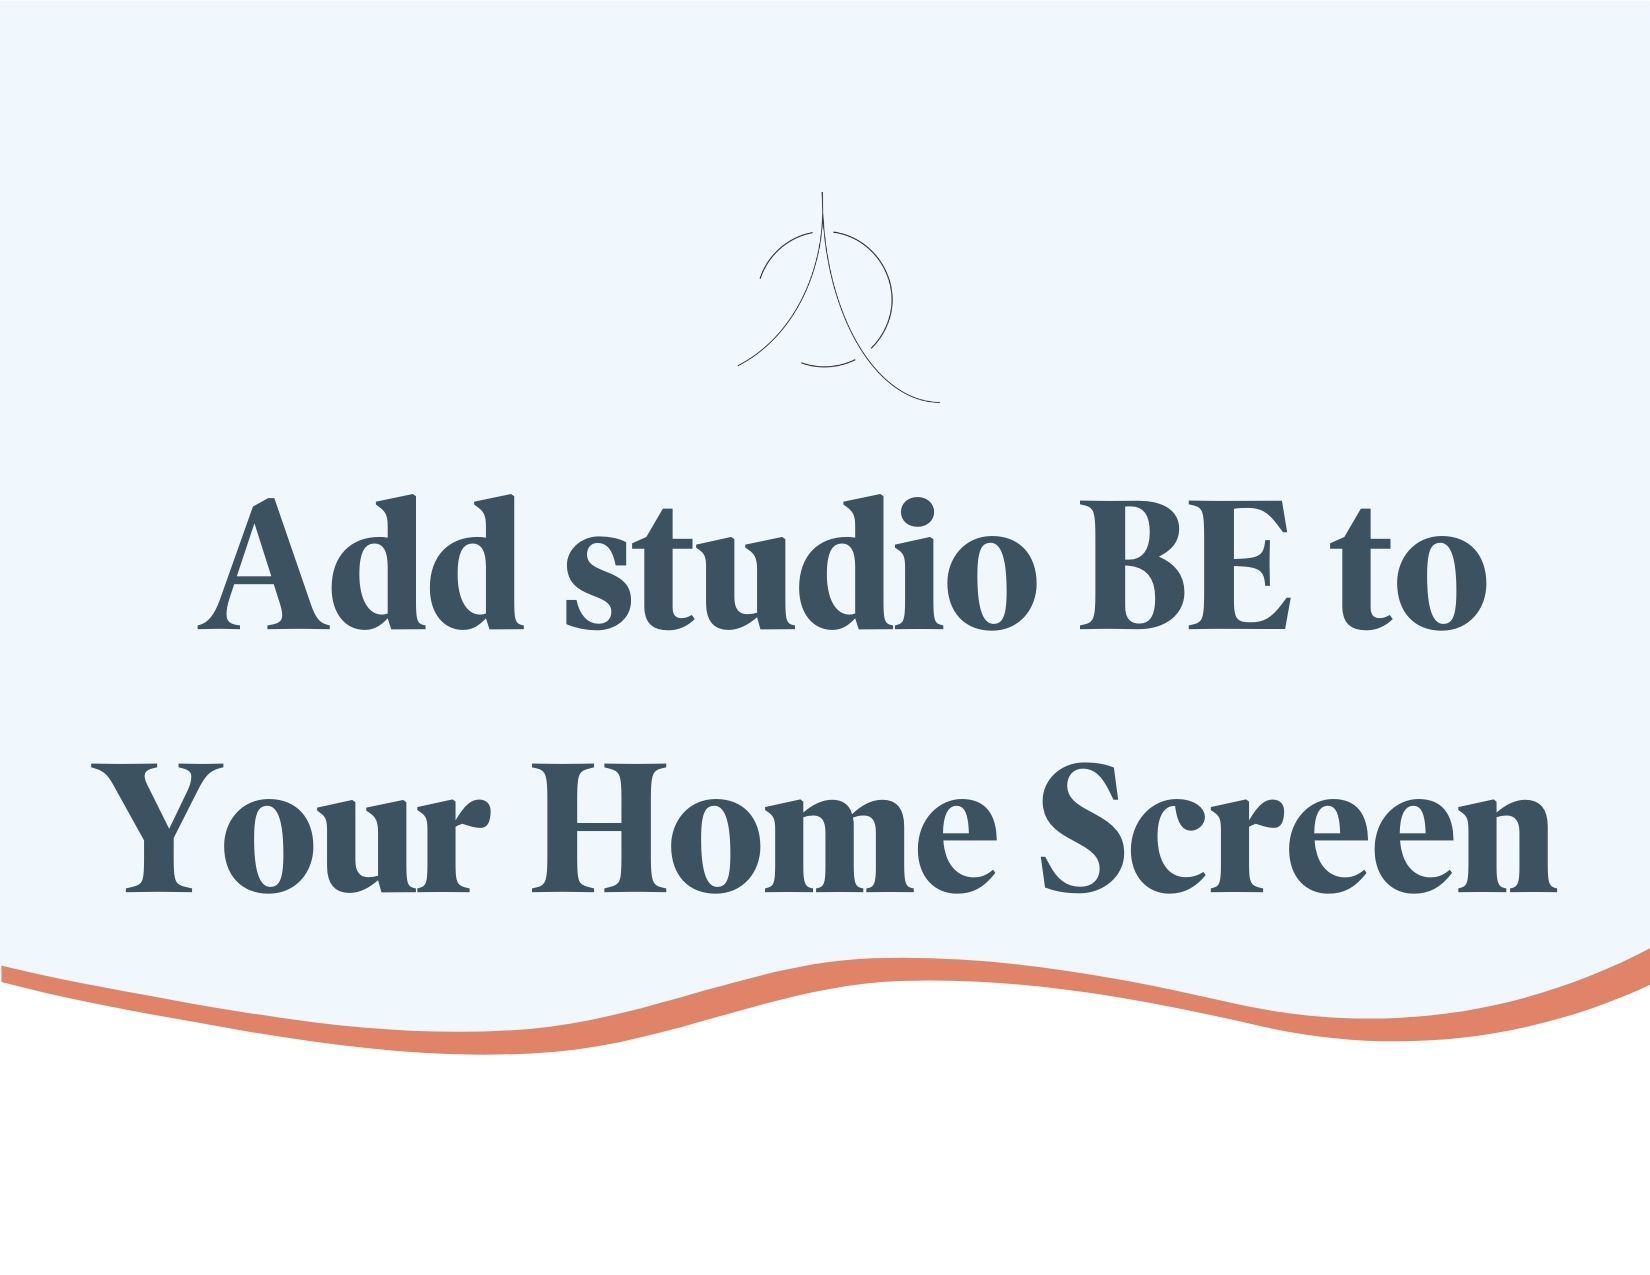 Add studio BE to Your Home Screen